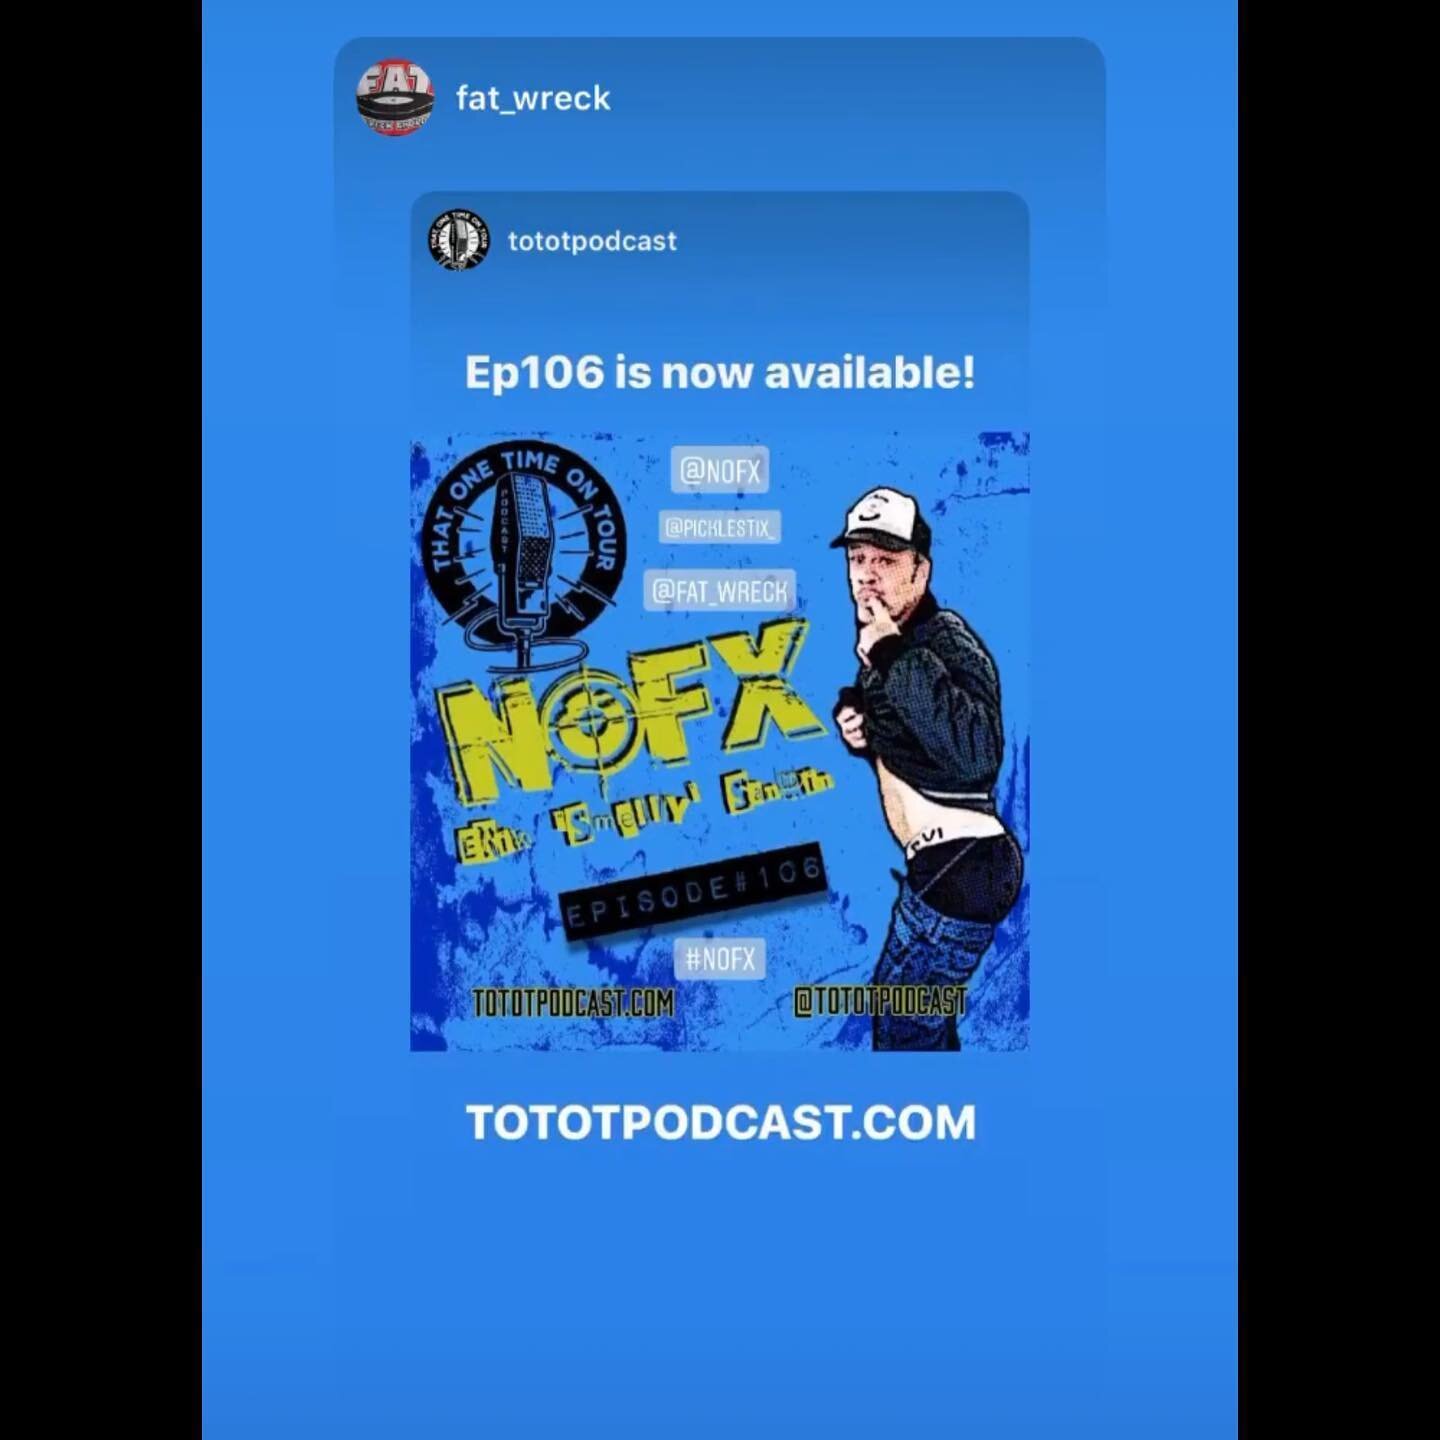 I did a thing!!!🥰 thanks to having THE coolest friends @tototpodcast ! It's crazy to see something I made shared. Stay tuned for some KILLER content coming up! I'm unbelievably stoked and honoured to be creating art for these super rad guests!
If yo